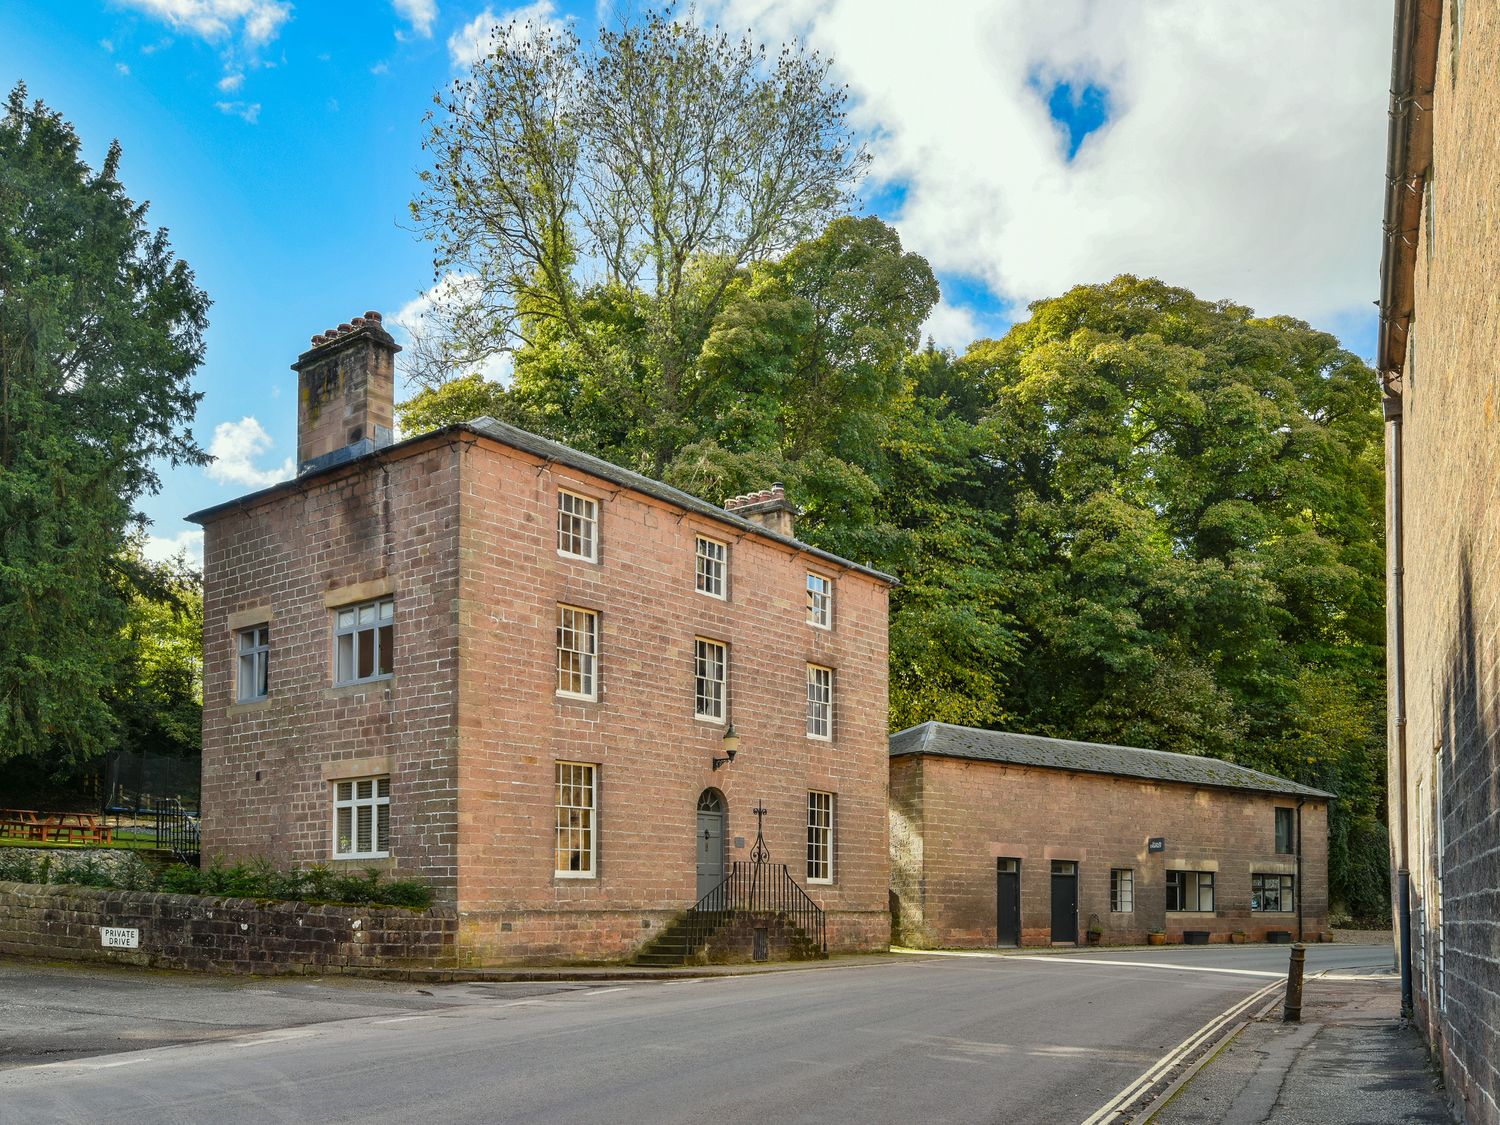 The Carriage House, Derbyshire